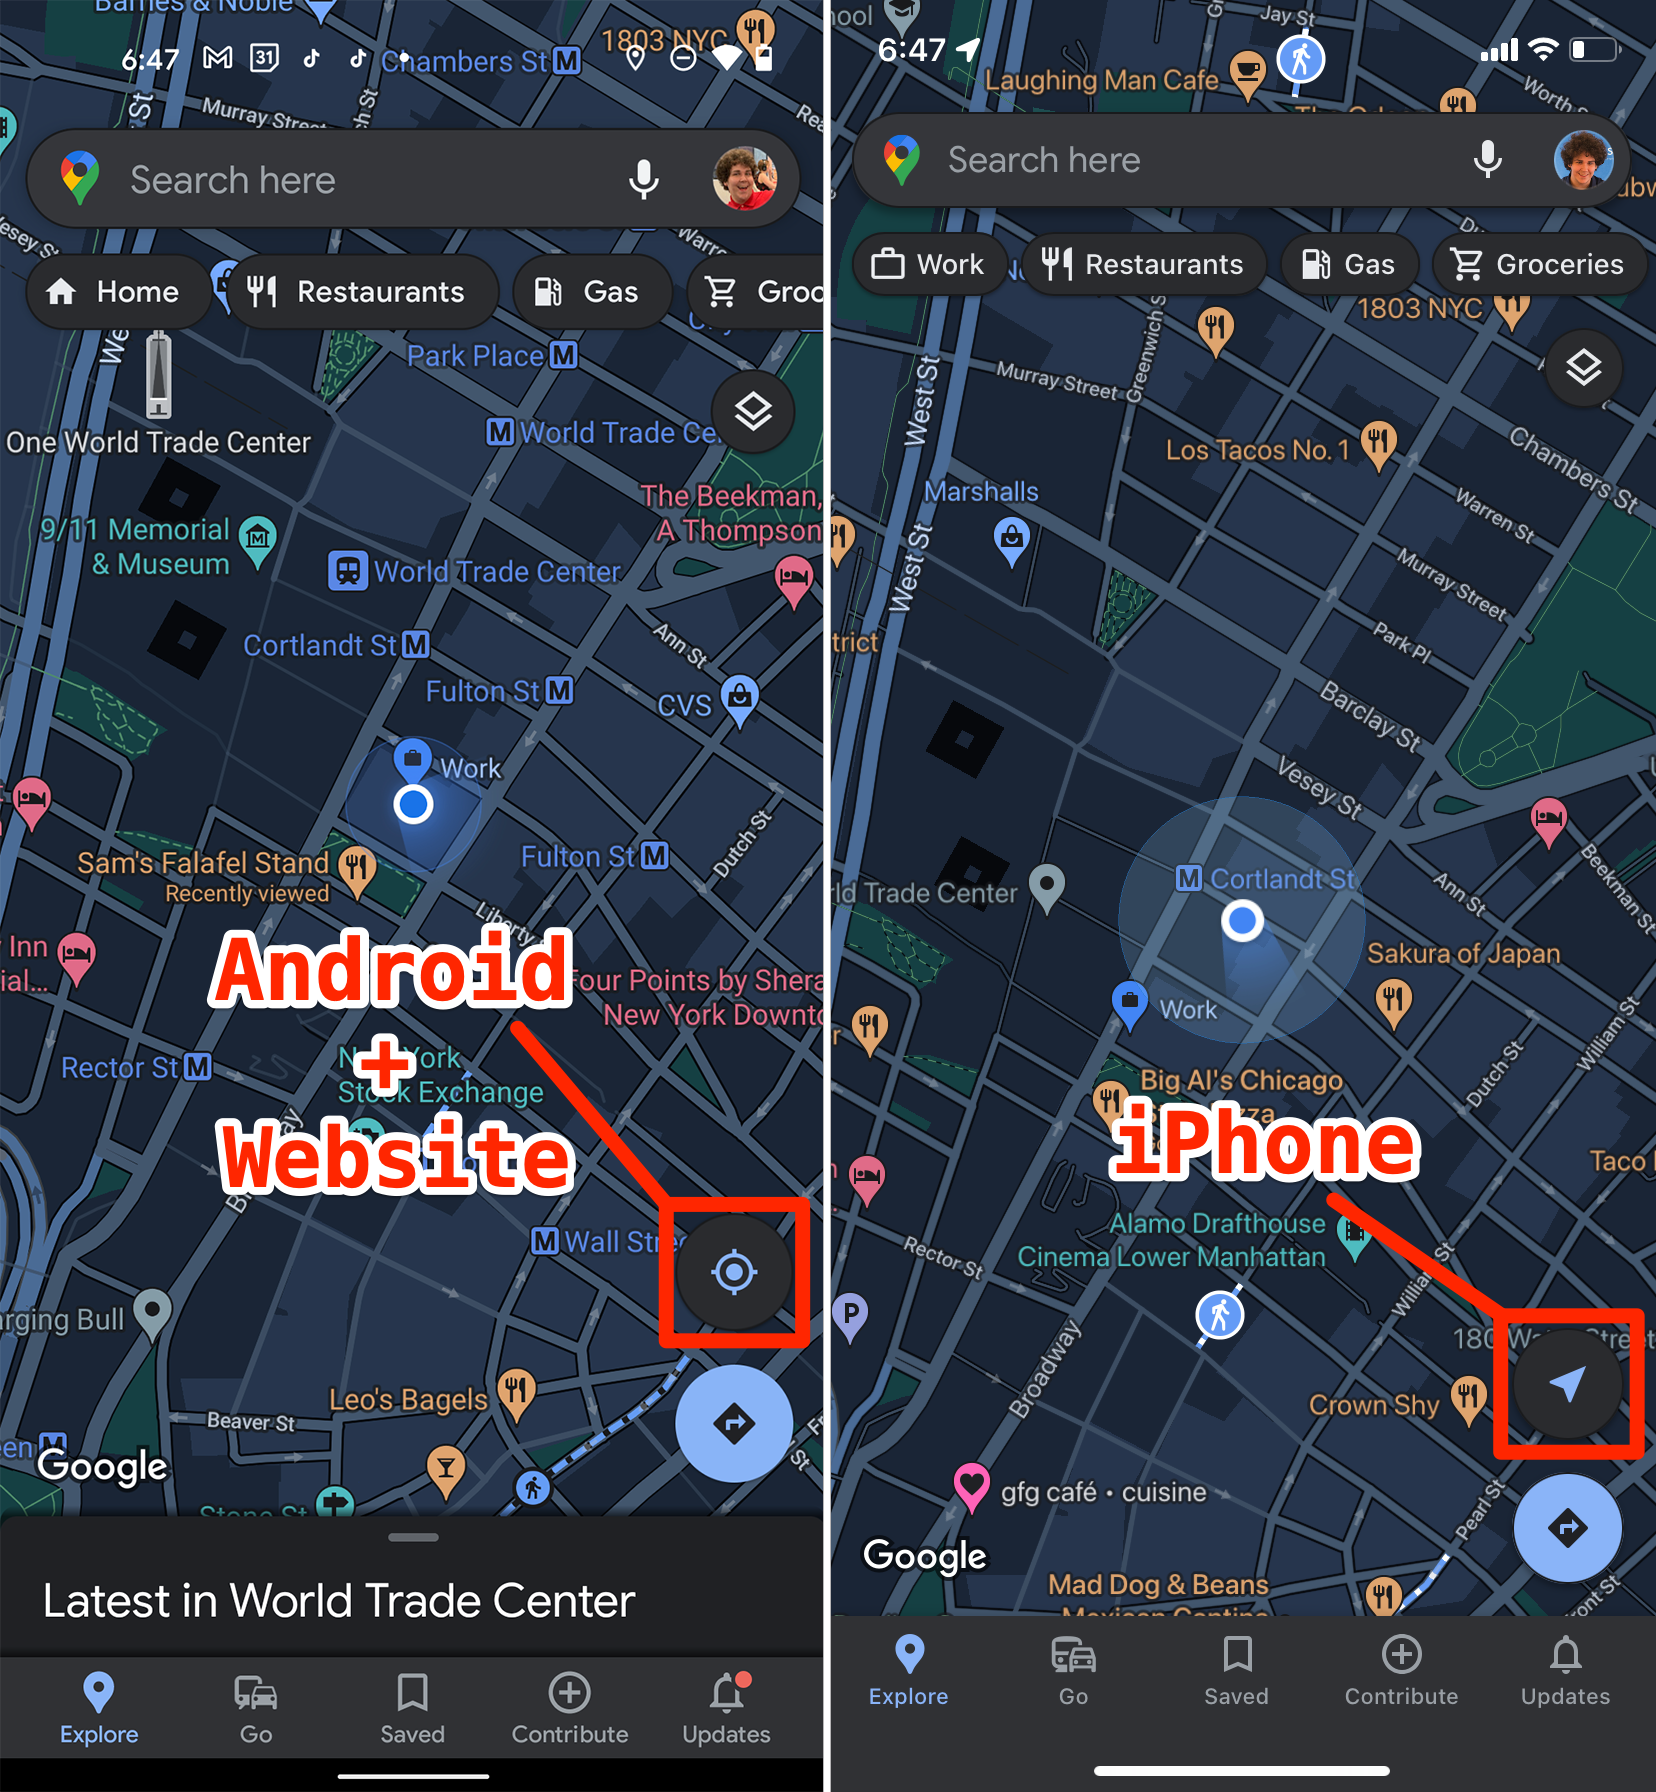 Screenshots from both the Android and iPhone Google Maps apps, highlighting the Current Location button.